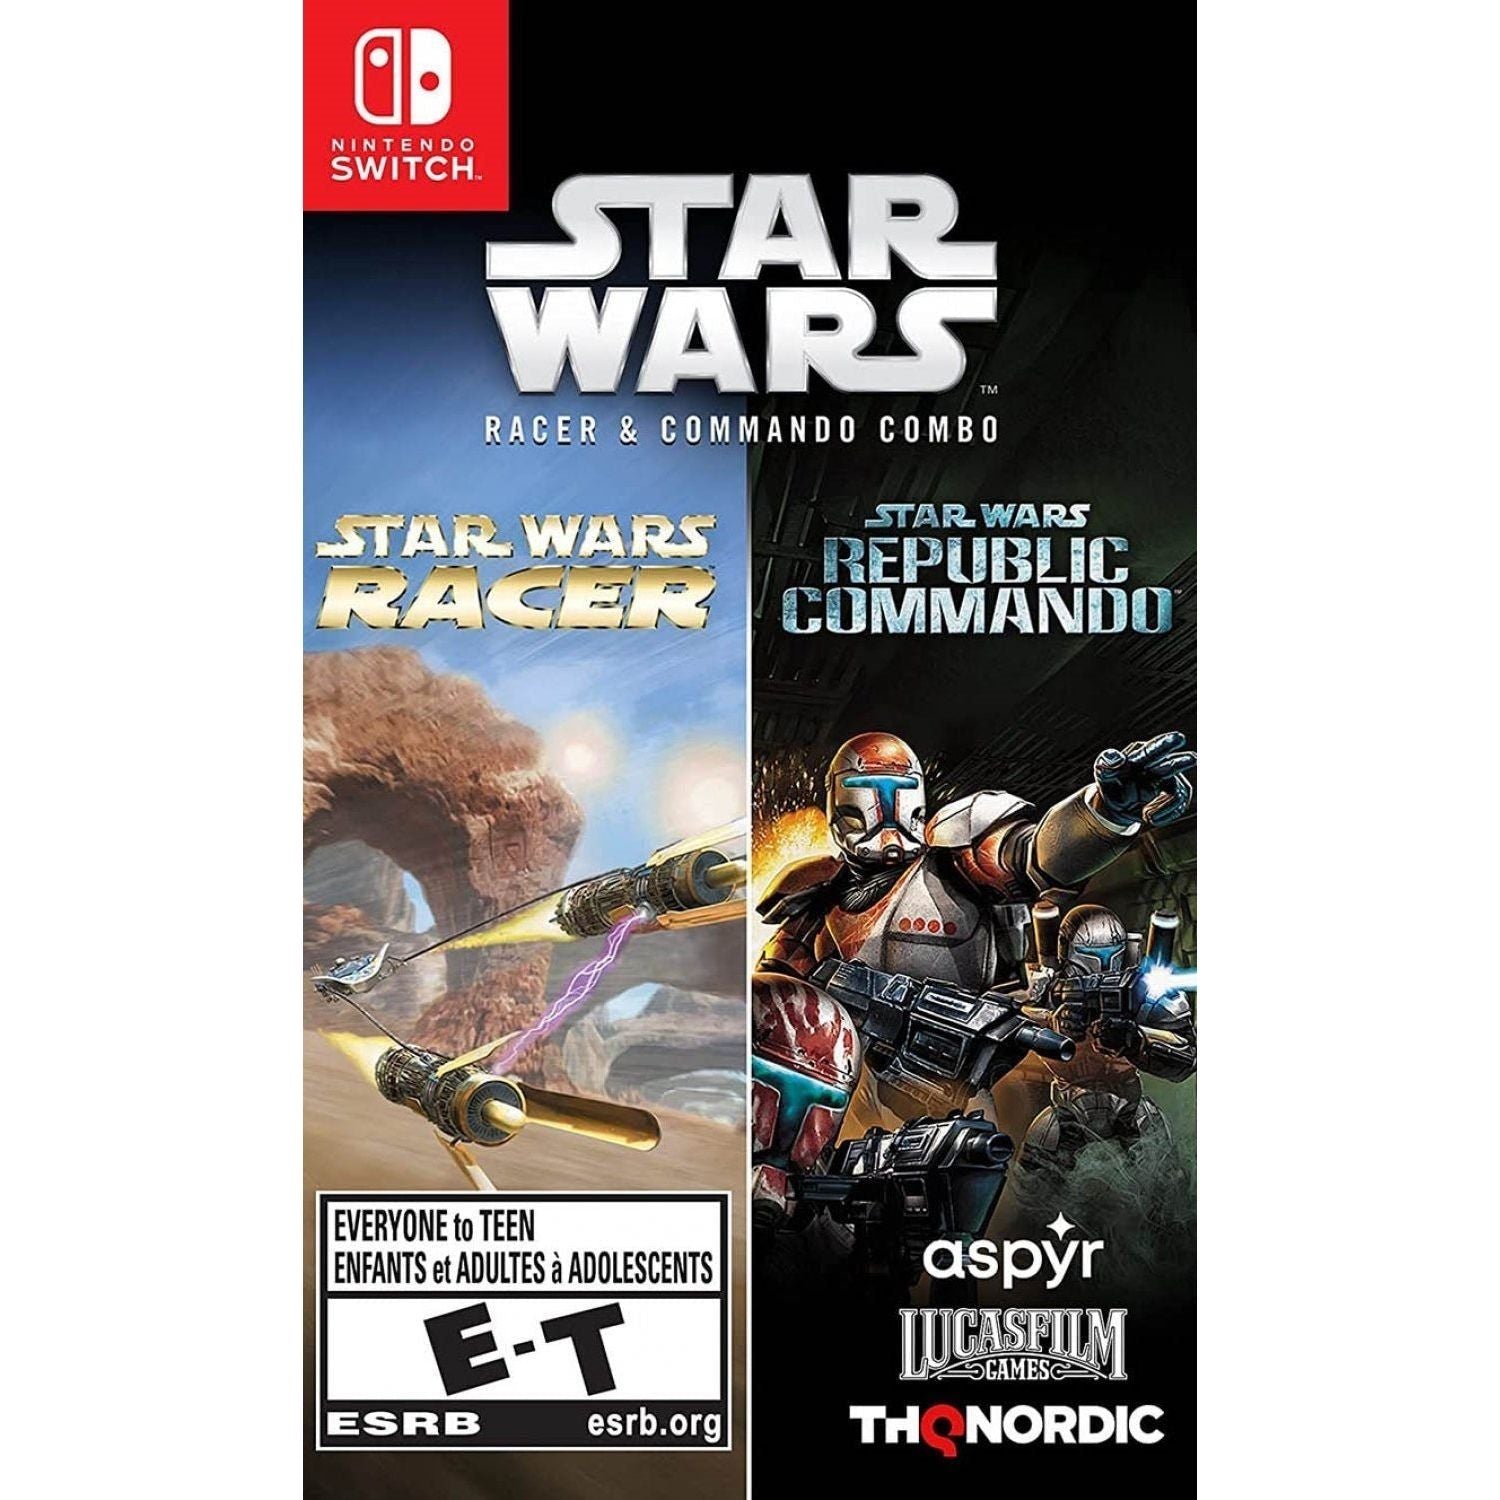 Switch - Star Wars Racer & Commando Combo (In Case)